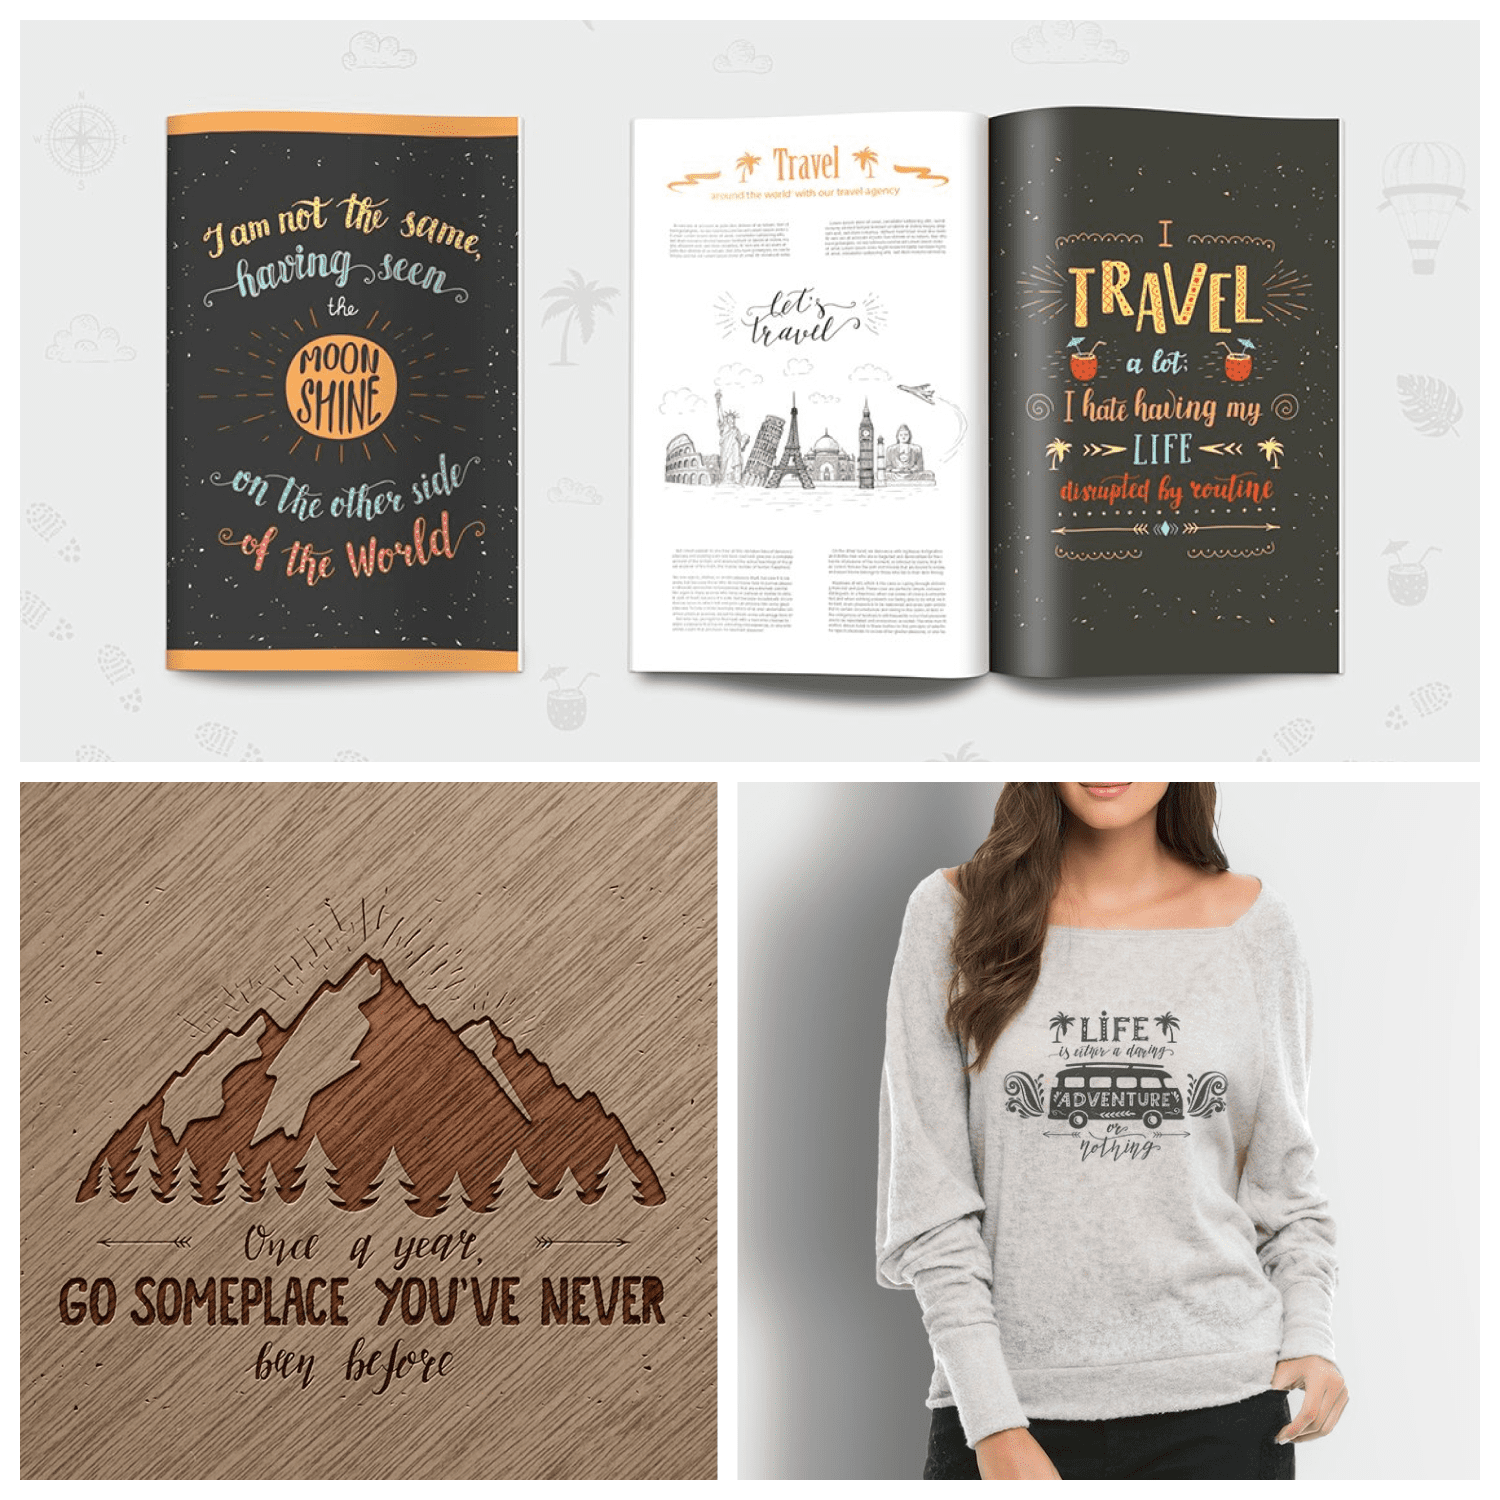 2Travel Hand Drawn Lettering.